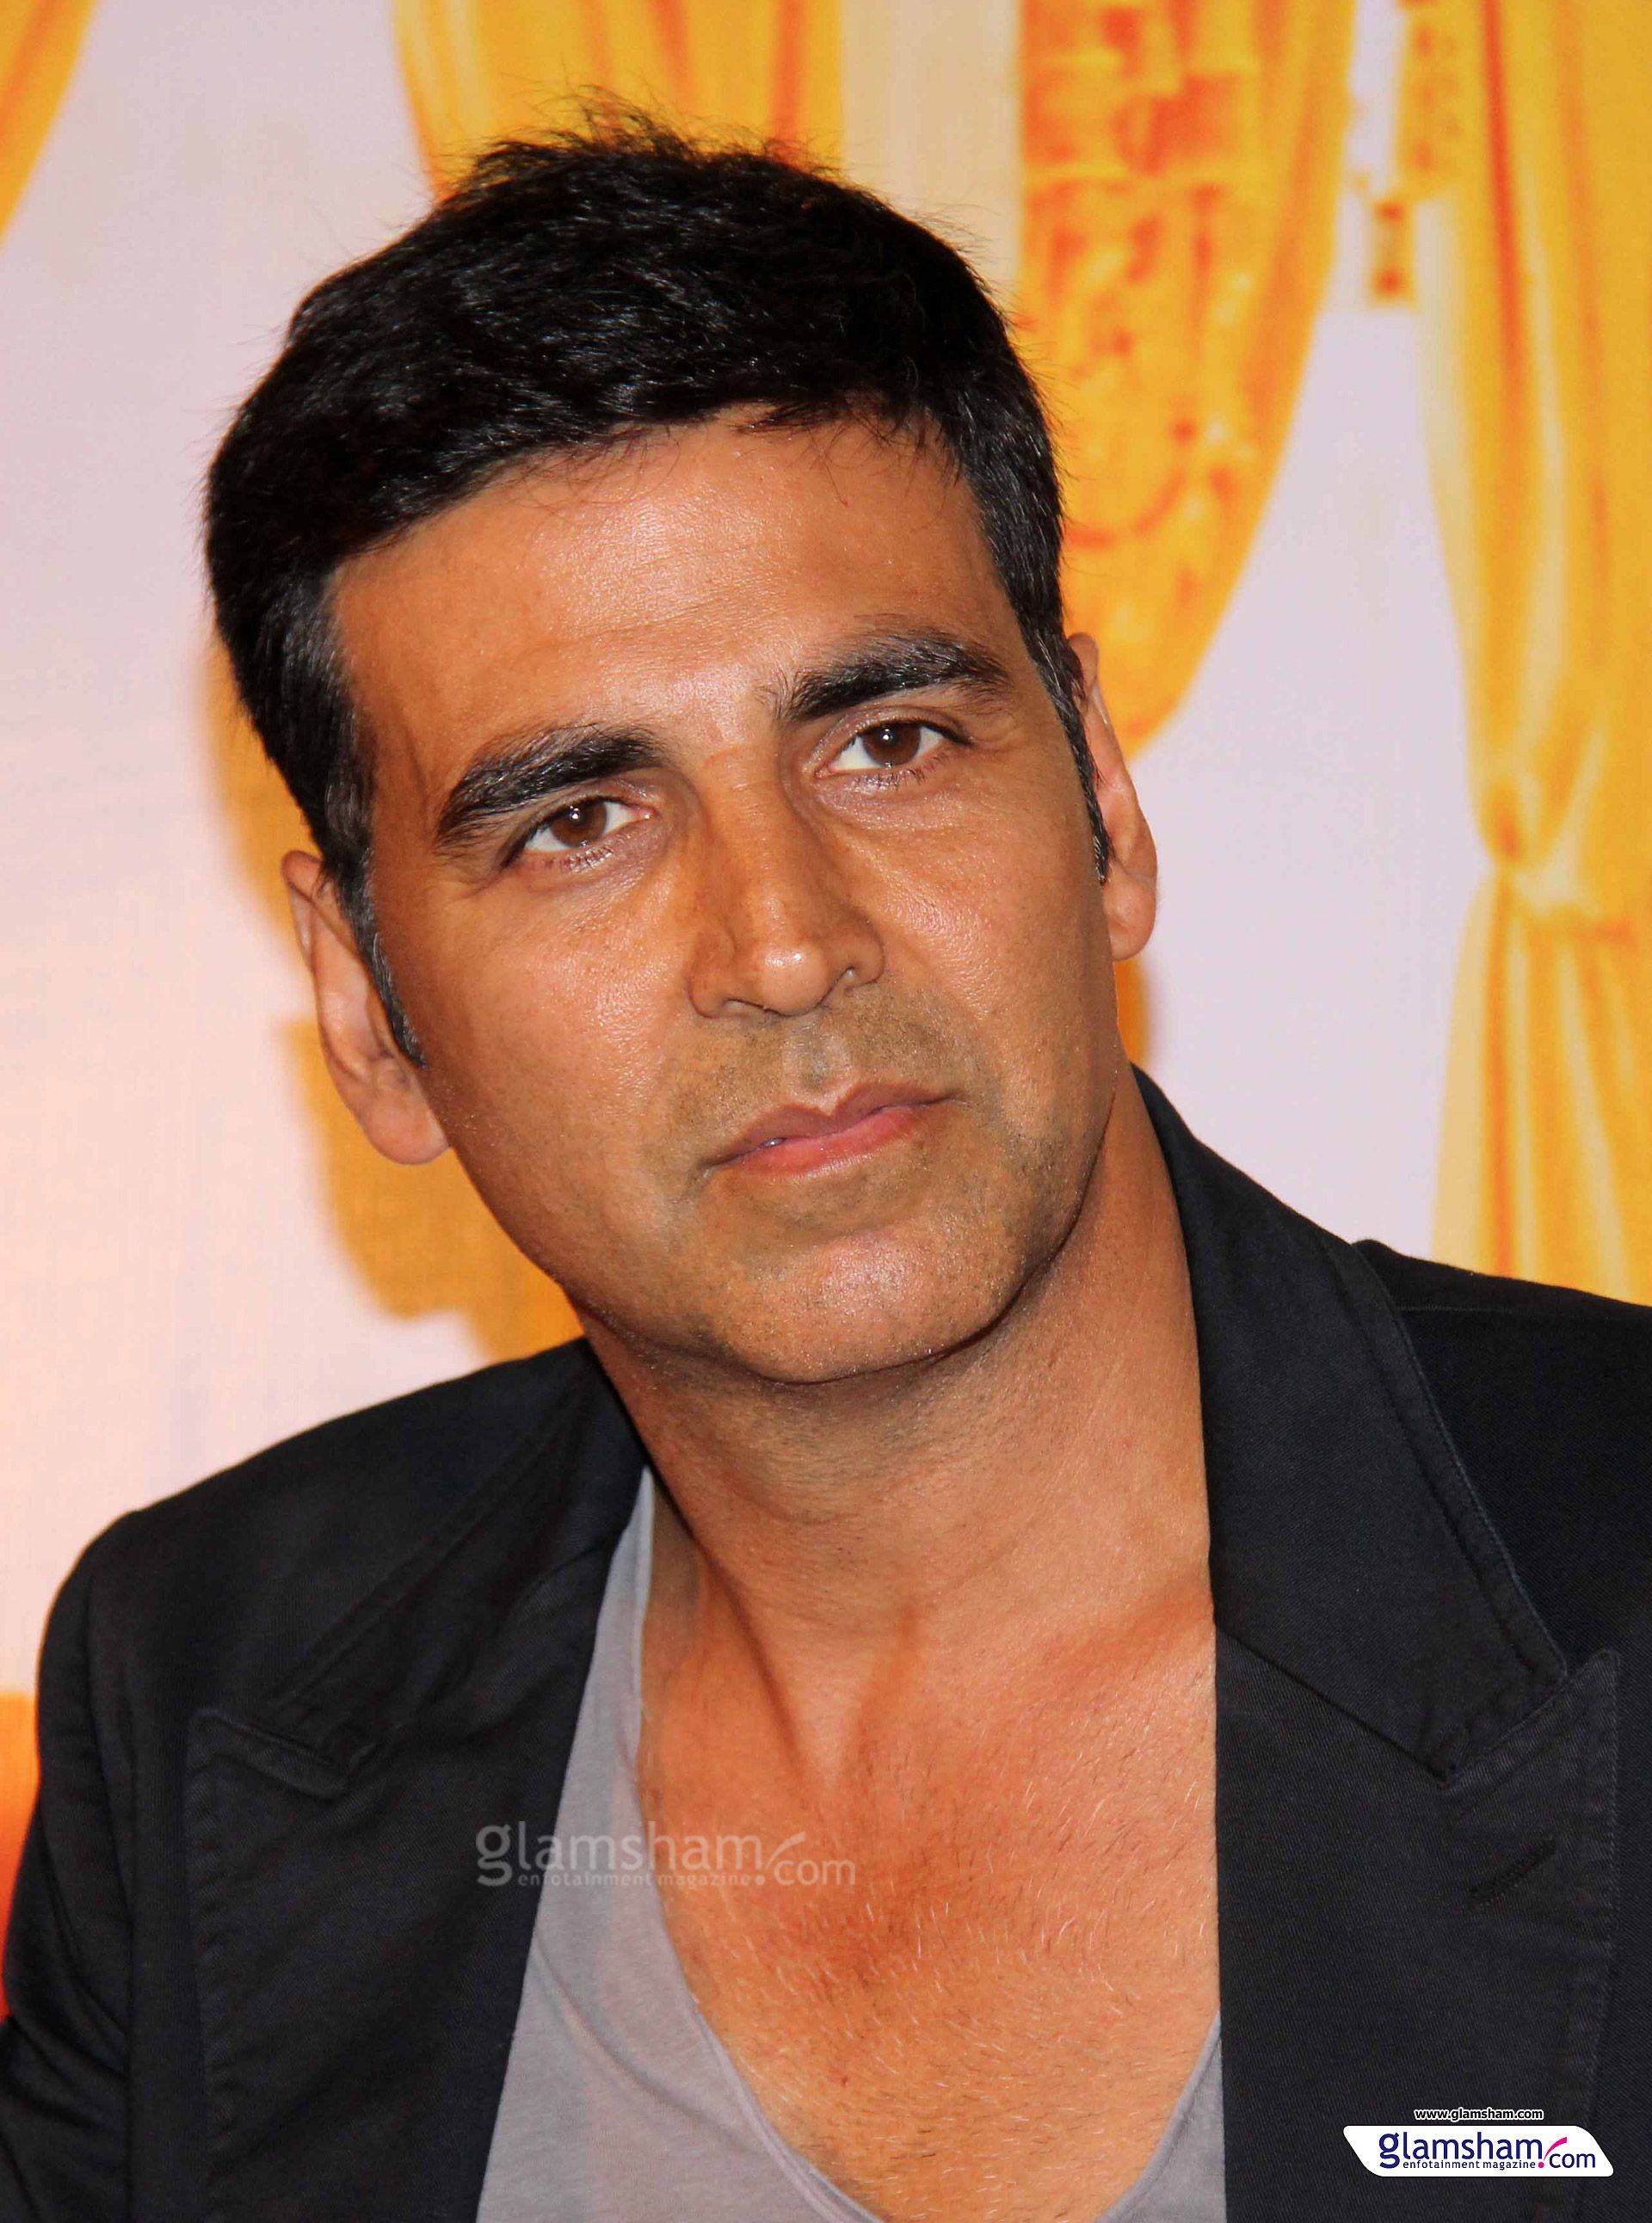 Akshay Kumar picture gallery HD picture # 7 glamsham.com